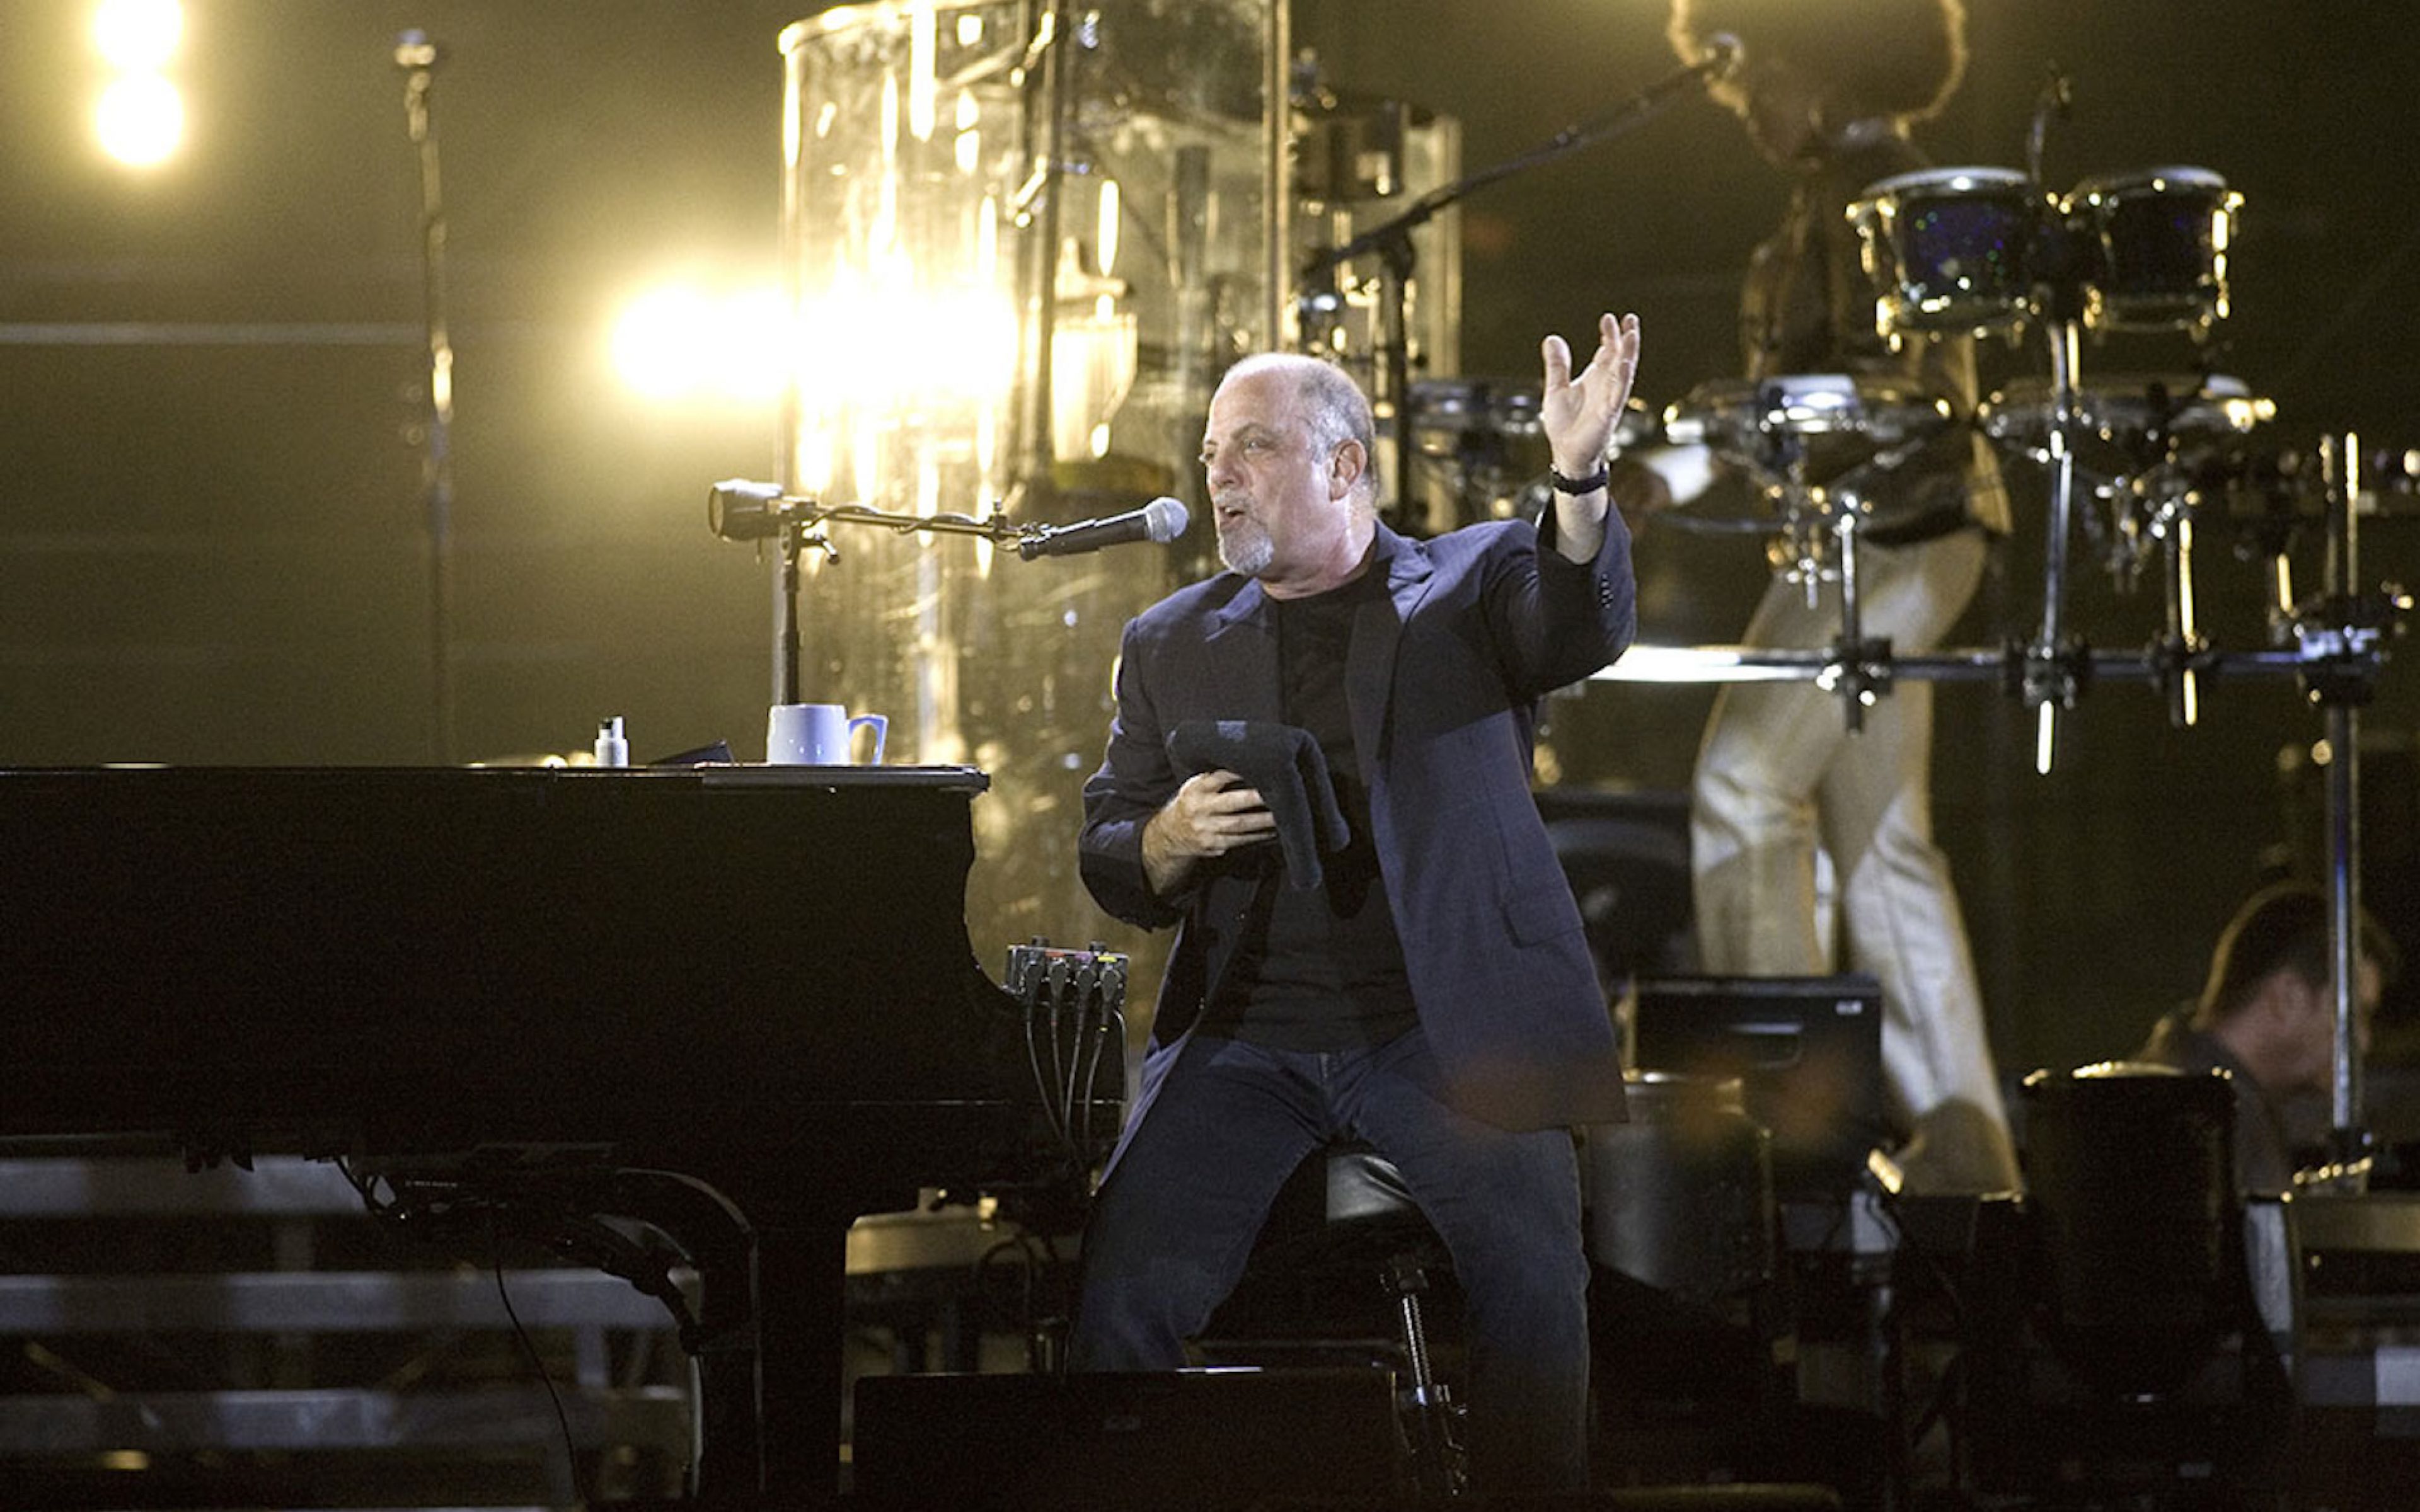 Billy Joel returns to Fenway Park for the fifth straight summer